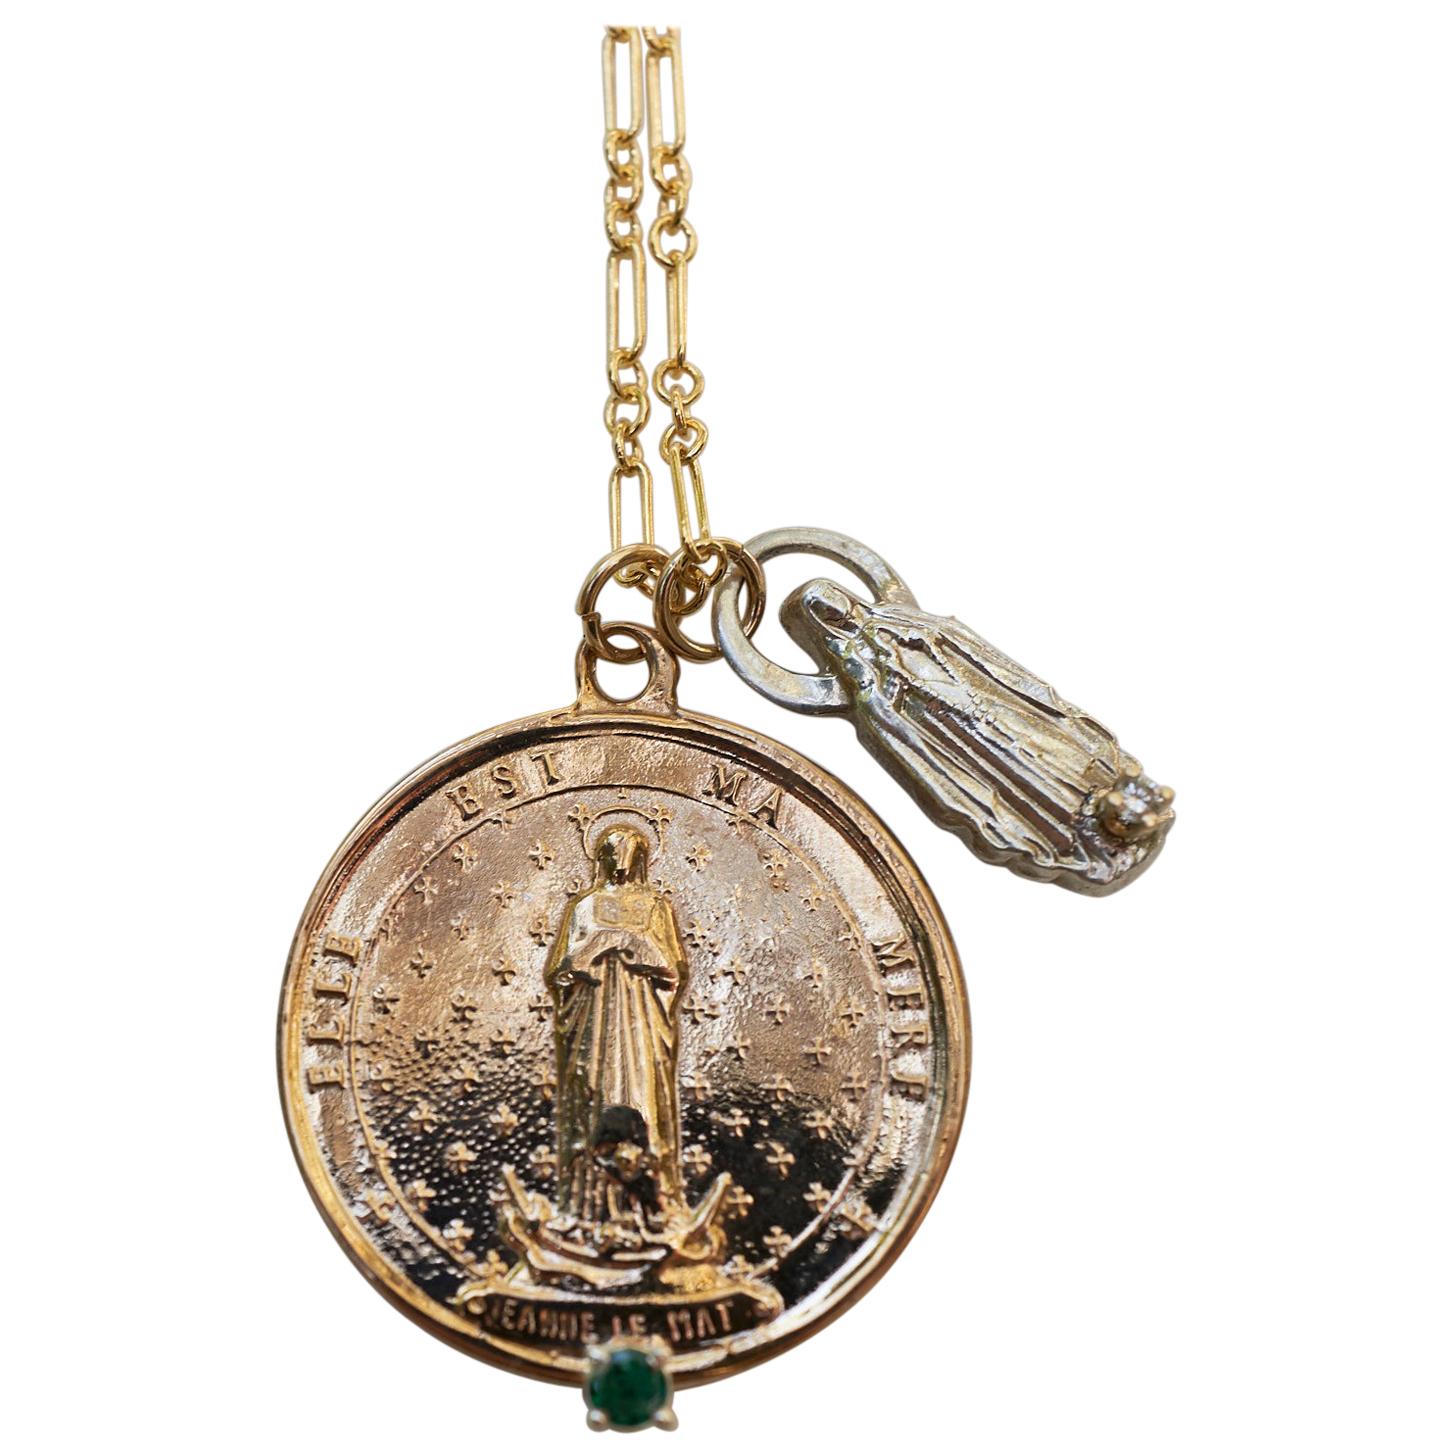 Medal Necklace Virgin Mary Emerald White Diamond Silver Bronze Gold Filled Chain J Dauphin

French Spiritual Medal Pendant with Jeanne Le Mat in Bronze Embellished with a Green Emerald and combined with a solid Silver Pendant Virgin Mary Figurine